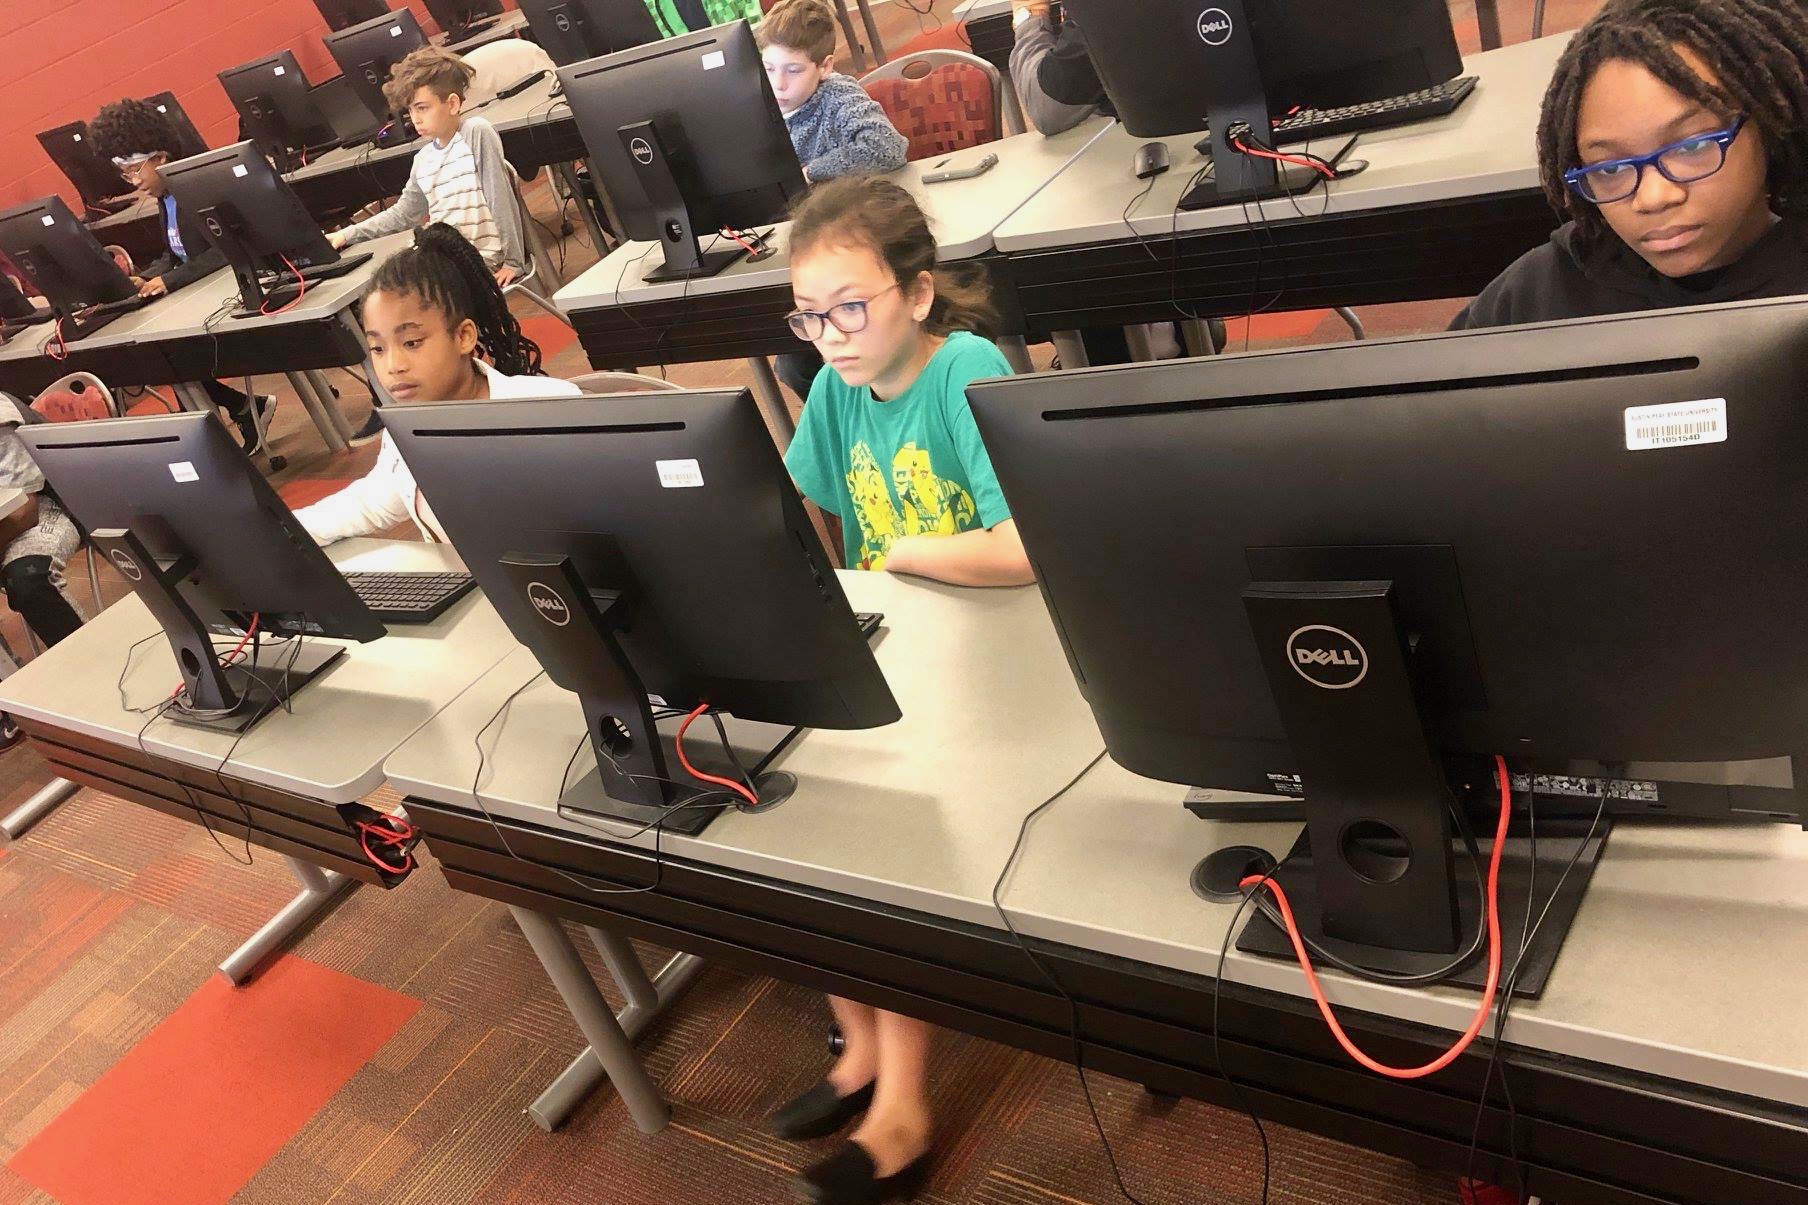 Austin Peay State University’s popular summer coding camps return to the University’s Clarksville campus this year after the pandemic forced officials to cancel last year’s camps.  And anyone who wants to attend the camps can sign up at a steep discount. The first half of campers who sign up will get a 90% discount off the normal $99 price. All other campers will get a 60% discount. The discount codes are on the coding camp website.  “We secured a $40,000 grant from Google to fund these camps, and we want to make sure that anyone who wants to go to these camps can go at a substantial discount,” said Dr. James Church, associate professor in APSU’s Department of Computer Science and Information Technology. “So, literally, it’s 10 bucks to sign up for a weeklong camp.”  Austin Peay also has added two new offerings to the summer coding camps – Minecraft camps for both middle and high school students and girls-preferred camps.  “The students in the Minecraft camps will get a free year of Minecraft (education edition) that they can take home with them,” Church said. “But the camp is not going to be just playing Minecraft, it’s going to be the basics to programming in Minecraft.”  Church also hopes the girls-preferred camps will give girls and young women a more comfortable space to attend the normally male-dominated camps.  This summer, Austin Peay is offering 10 camps – including the popular “Make Your Own Website” and “Make Your Own Video Games” camps. All camps are half-day and Monday-Friday.  Middle School Camps  For those entering sixth, seventh or eighth grades.  • Make Your Own Websites, Camp A. o Registration deadline: May 25. o Camp times: 9 a.m.-noon, May 31-June 4. • Make Your Own Video Games, Camp B. o Registration deadline: May 25. o Camp times: 1:30-4:30 p.m., May 31-June 4. • Make Your Own Websites, Camp C. o Registration deadline: June 1. o Camp times: 9 a.m.-noon, June 7-11. • Make Your Own Video Games, Camp D. o Registration deadline: June 1. o Camp times: 1:30-4:30 p.m., June 7-11. • Make Your Own Websites, Camp E. o Registration deadline: June 8. o Camp times: 9 a.m.-noon, June 14-18. • Learn Programming with Minecraft, Camp F. o Registration deadline: June 8. o Camp times: 1:30-4:30 p.m., June 14-18.  High School Camps  For those entering ninth, 10th, 11th or 12th grades and those entering their first year of college.  • Make Your Own Websites, Camp G. o Registration deadline: June 15. o Camp times: 9 a.m.-noon, June 21-25. • Make Your Own Video Games, Camp H. o Registration deadline: June 15. o Camp times: 1:30-4:30 p.m., June 21-25. • Learn Programming with Minecraft (girls preferred), Camp I. o Registration deadline: June 22. o Camp times: 9 a.m.-noon, June 28-July 2. • Make Your Own Video Games (girls preferred), Camp J. o Registration deadline: June 22. o Camp times: 1:30-4:30 p.m., June 22-July 2.  The camps will be at APSU’s state-of-the-art computer labs in the Maynard Mathematics and Computer Science Building and the College of STEM Technology Building.  All the camps are led by Austin Peay bachelor’s or master’s degree students (currently Nicholas Sparks, Johnathan Dickson, Timothy Jordan and Kaitlyn Hardin). Dr. Church designed the course curriculum.  Masks are required, and instructors will enforce social distancing. The labs also will be at half-capacity to follow Austin Peay COVID-19 guidelines.  For more information, visit www.apsu.edu/csci/camp.  Sponsored by Google  The summer coding camps are heavily funded by a competitive grant from Google. Austin Peay also recently received Google community grants to support a new makerspace at the APSU GIS Center and Operation: STEM Success, which offers free Algebra I and chemistry tutoring to local high school students.